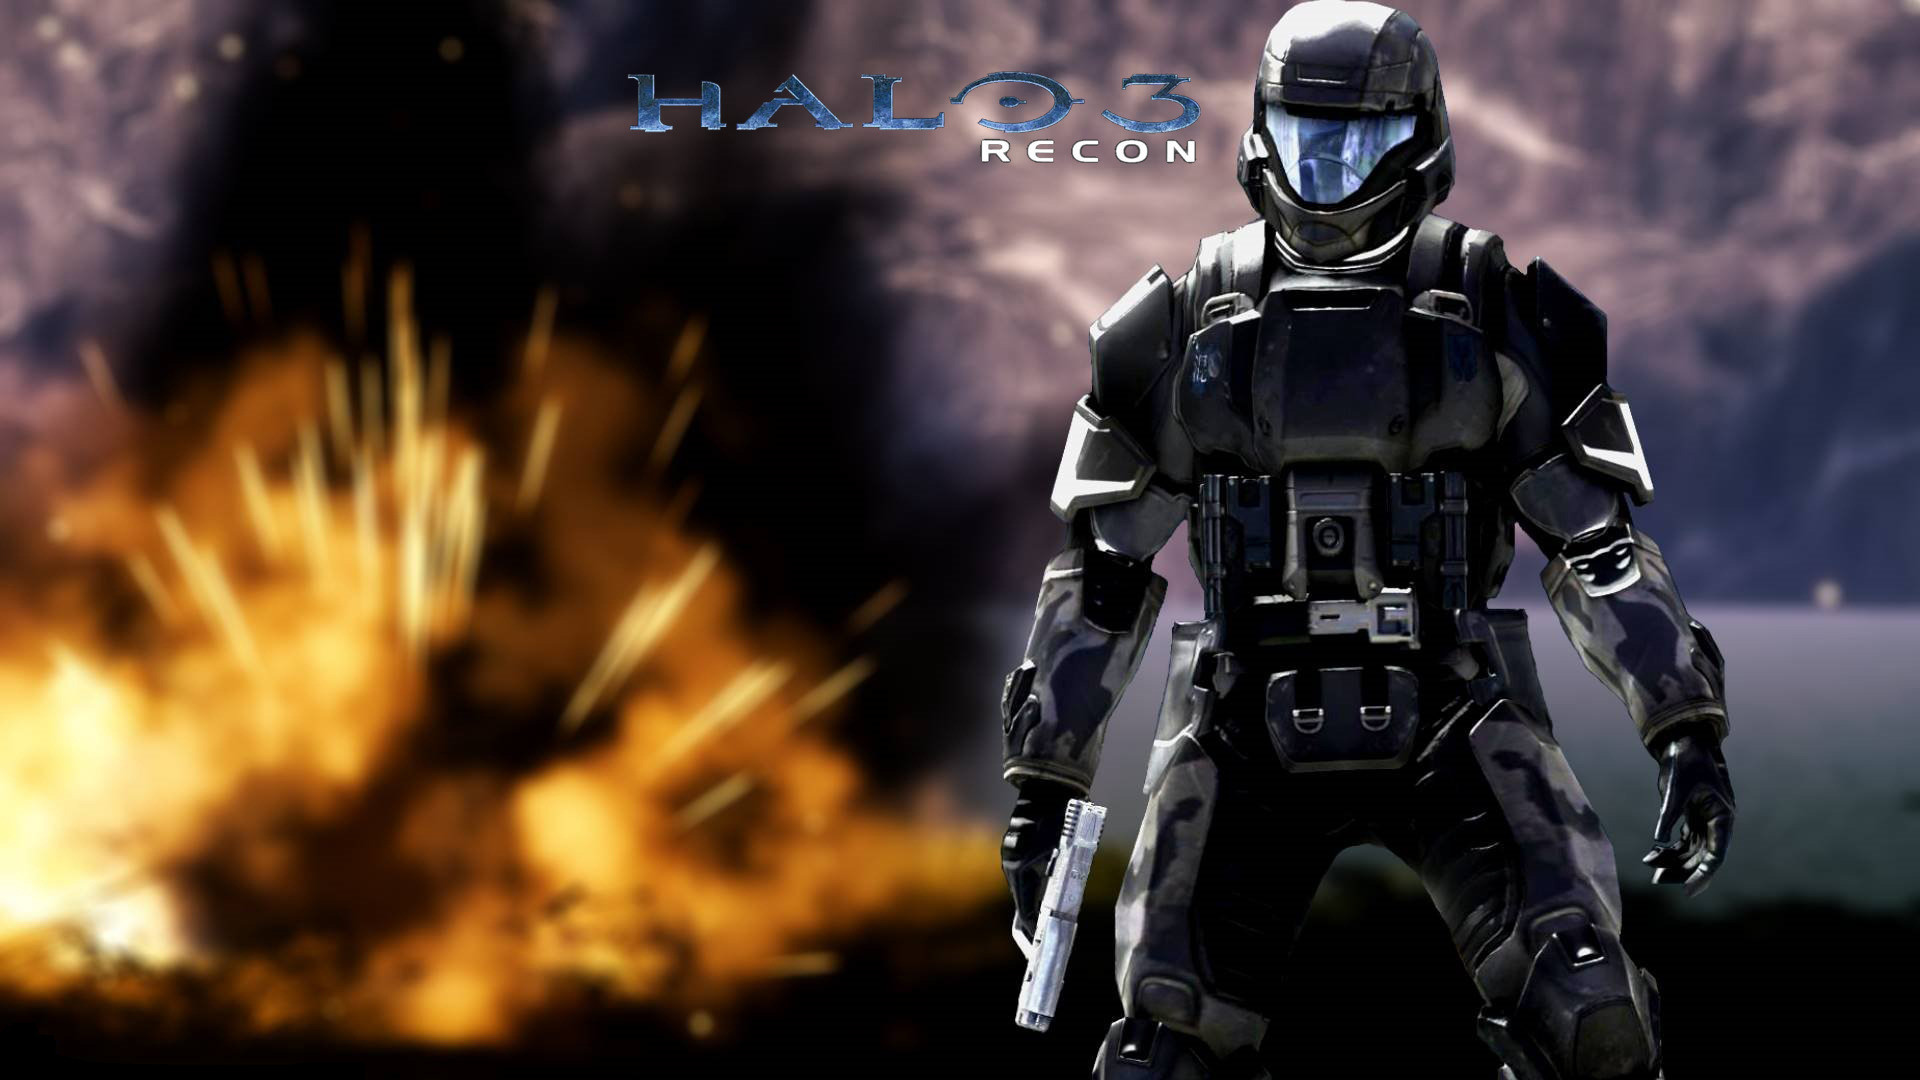 1920x1080 0 1600x1200 haloWallpaper and Background ID4241  halowallpaper